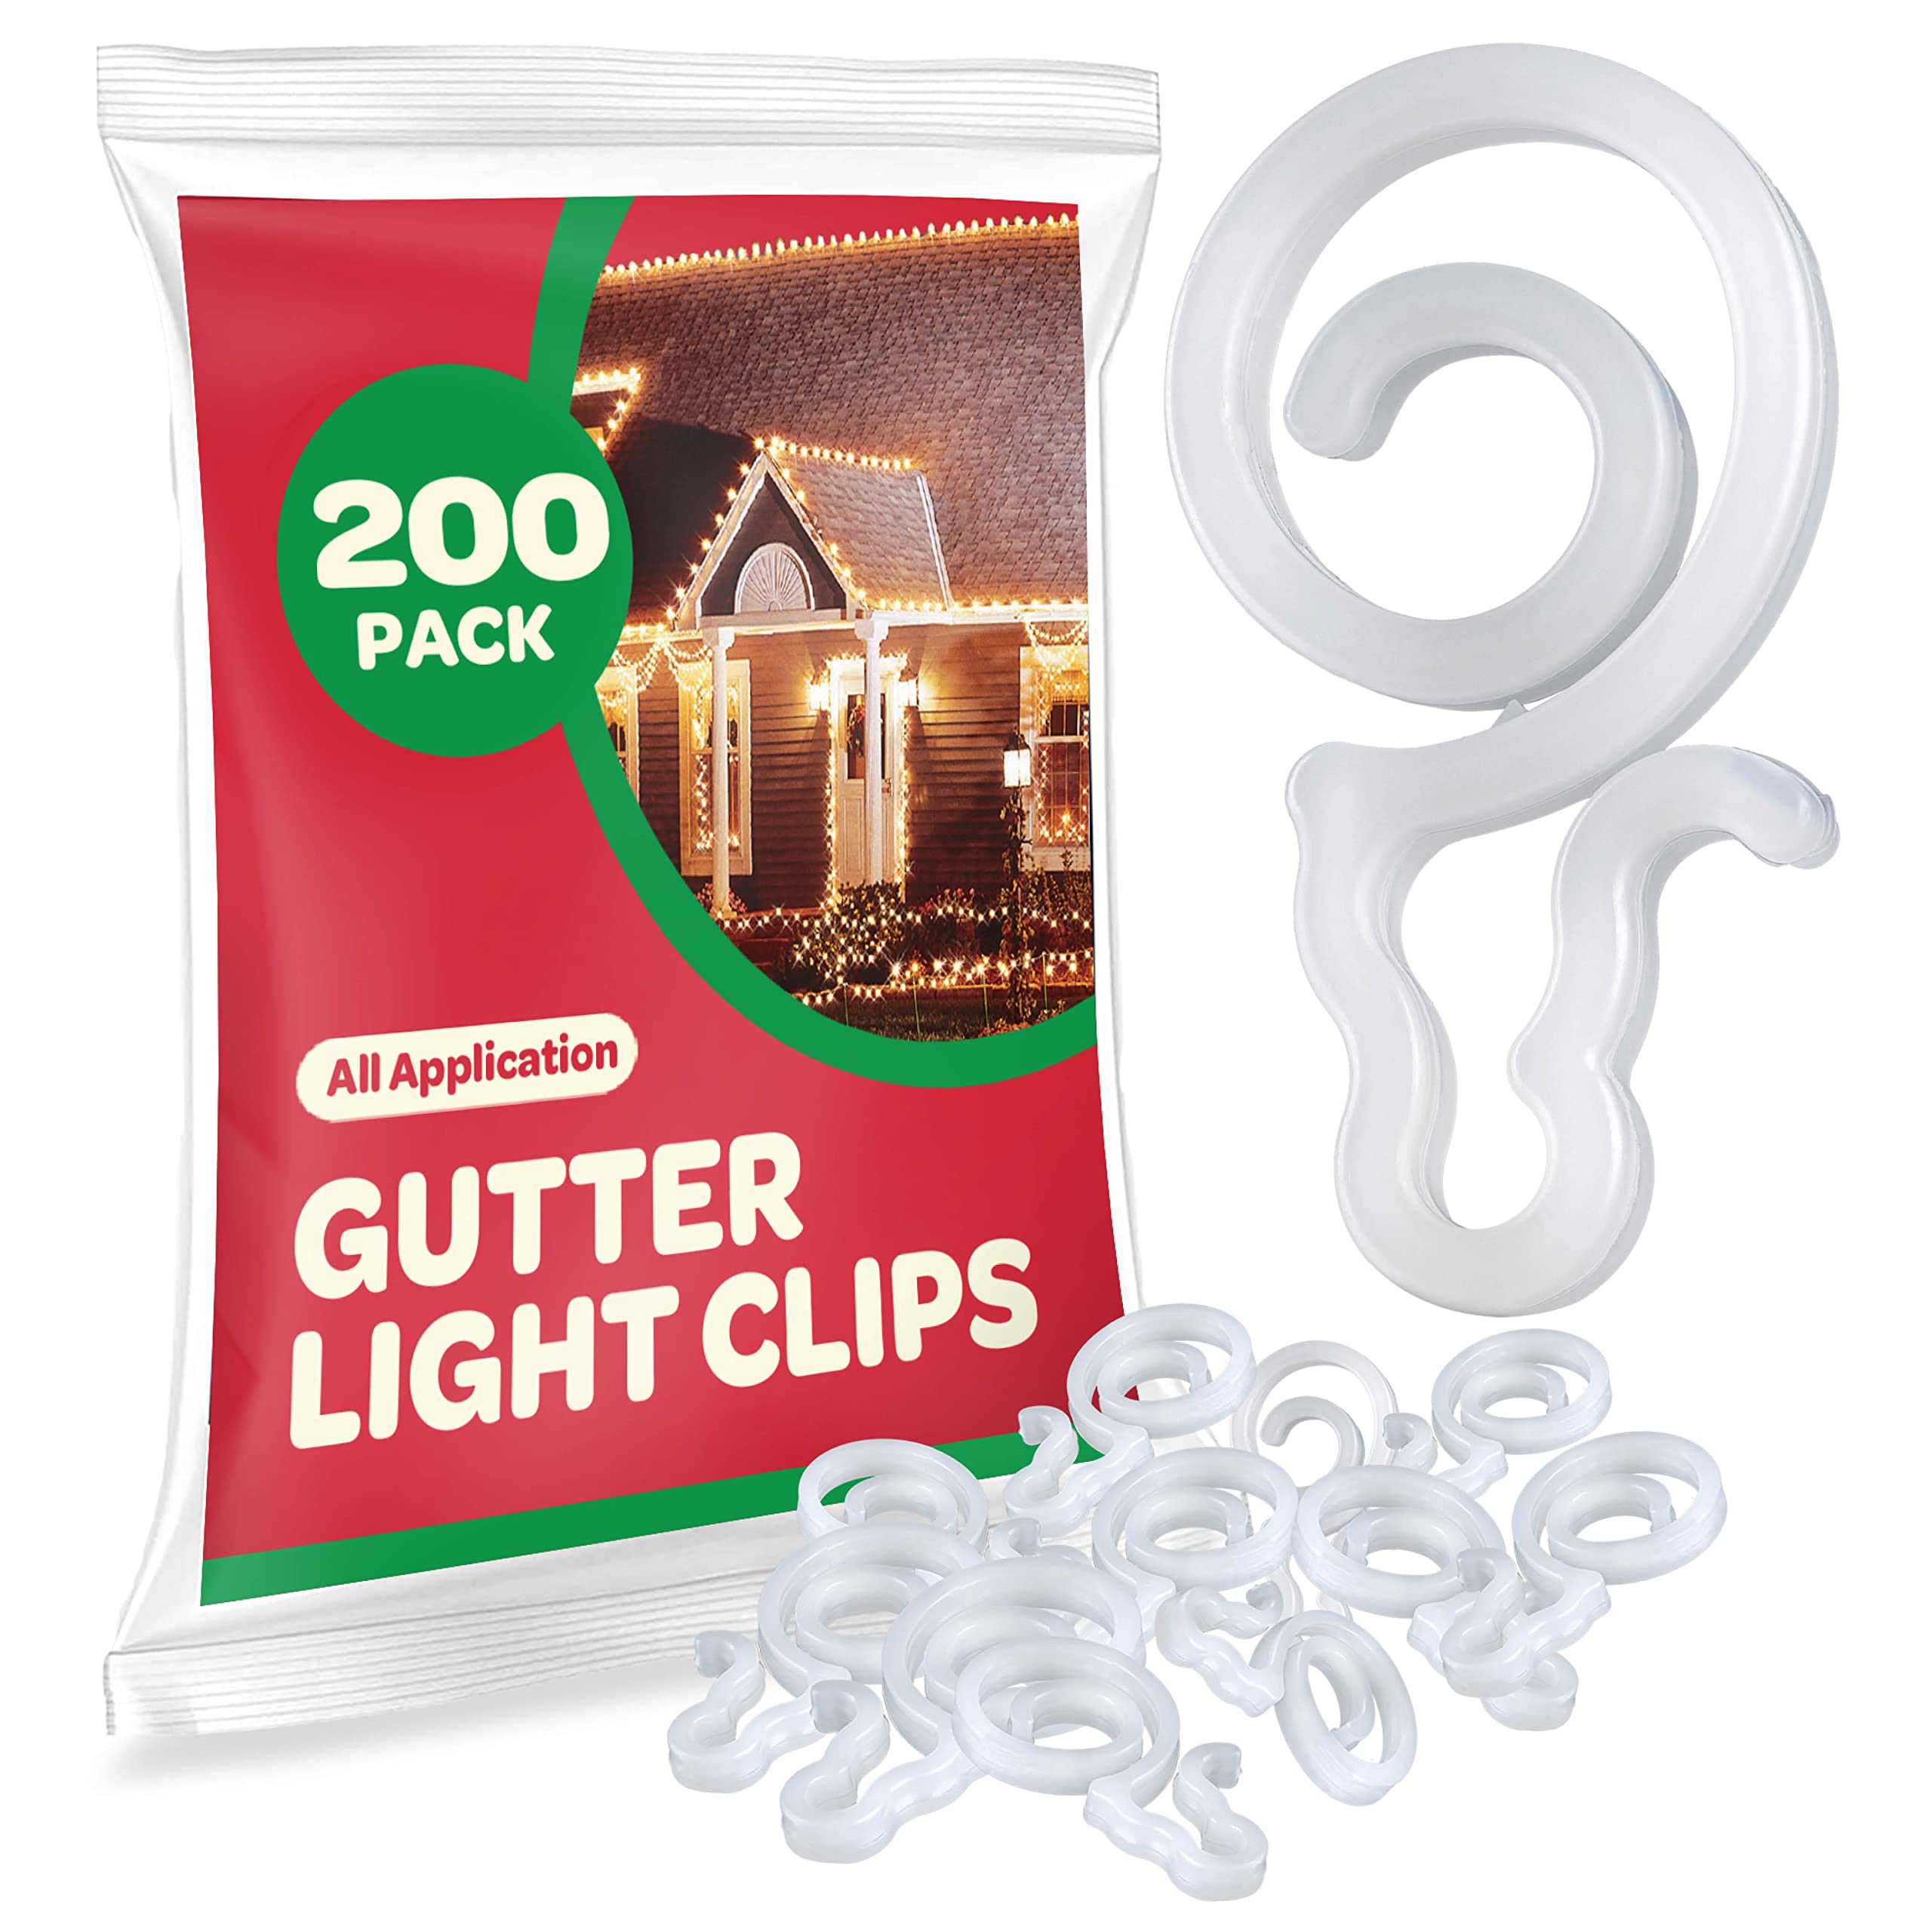 Gutter Light Clips [Set of 200] Gutter Light Clips, Hang By Cord All Type Outdoor Lights C5, C6, C7, C9, Mini, Icicle, Rope Lights. Christmas Light Clips Outdoor - No Tools Required - USA Made